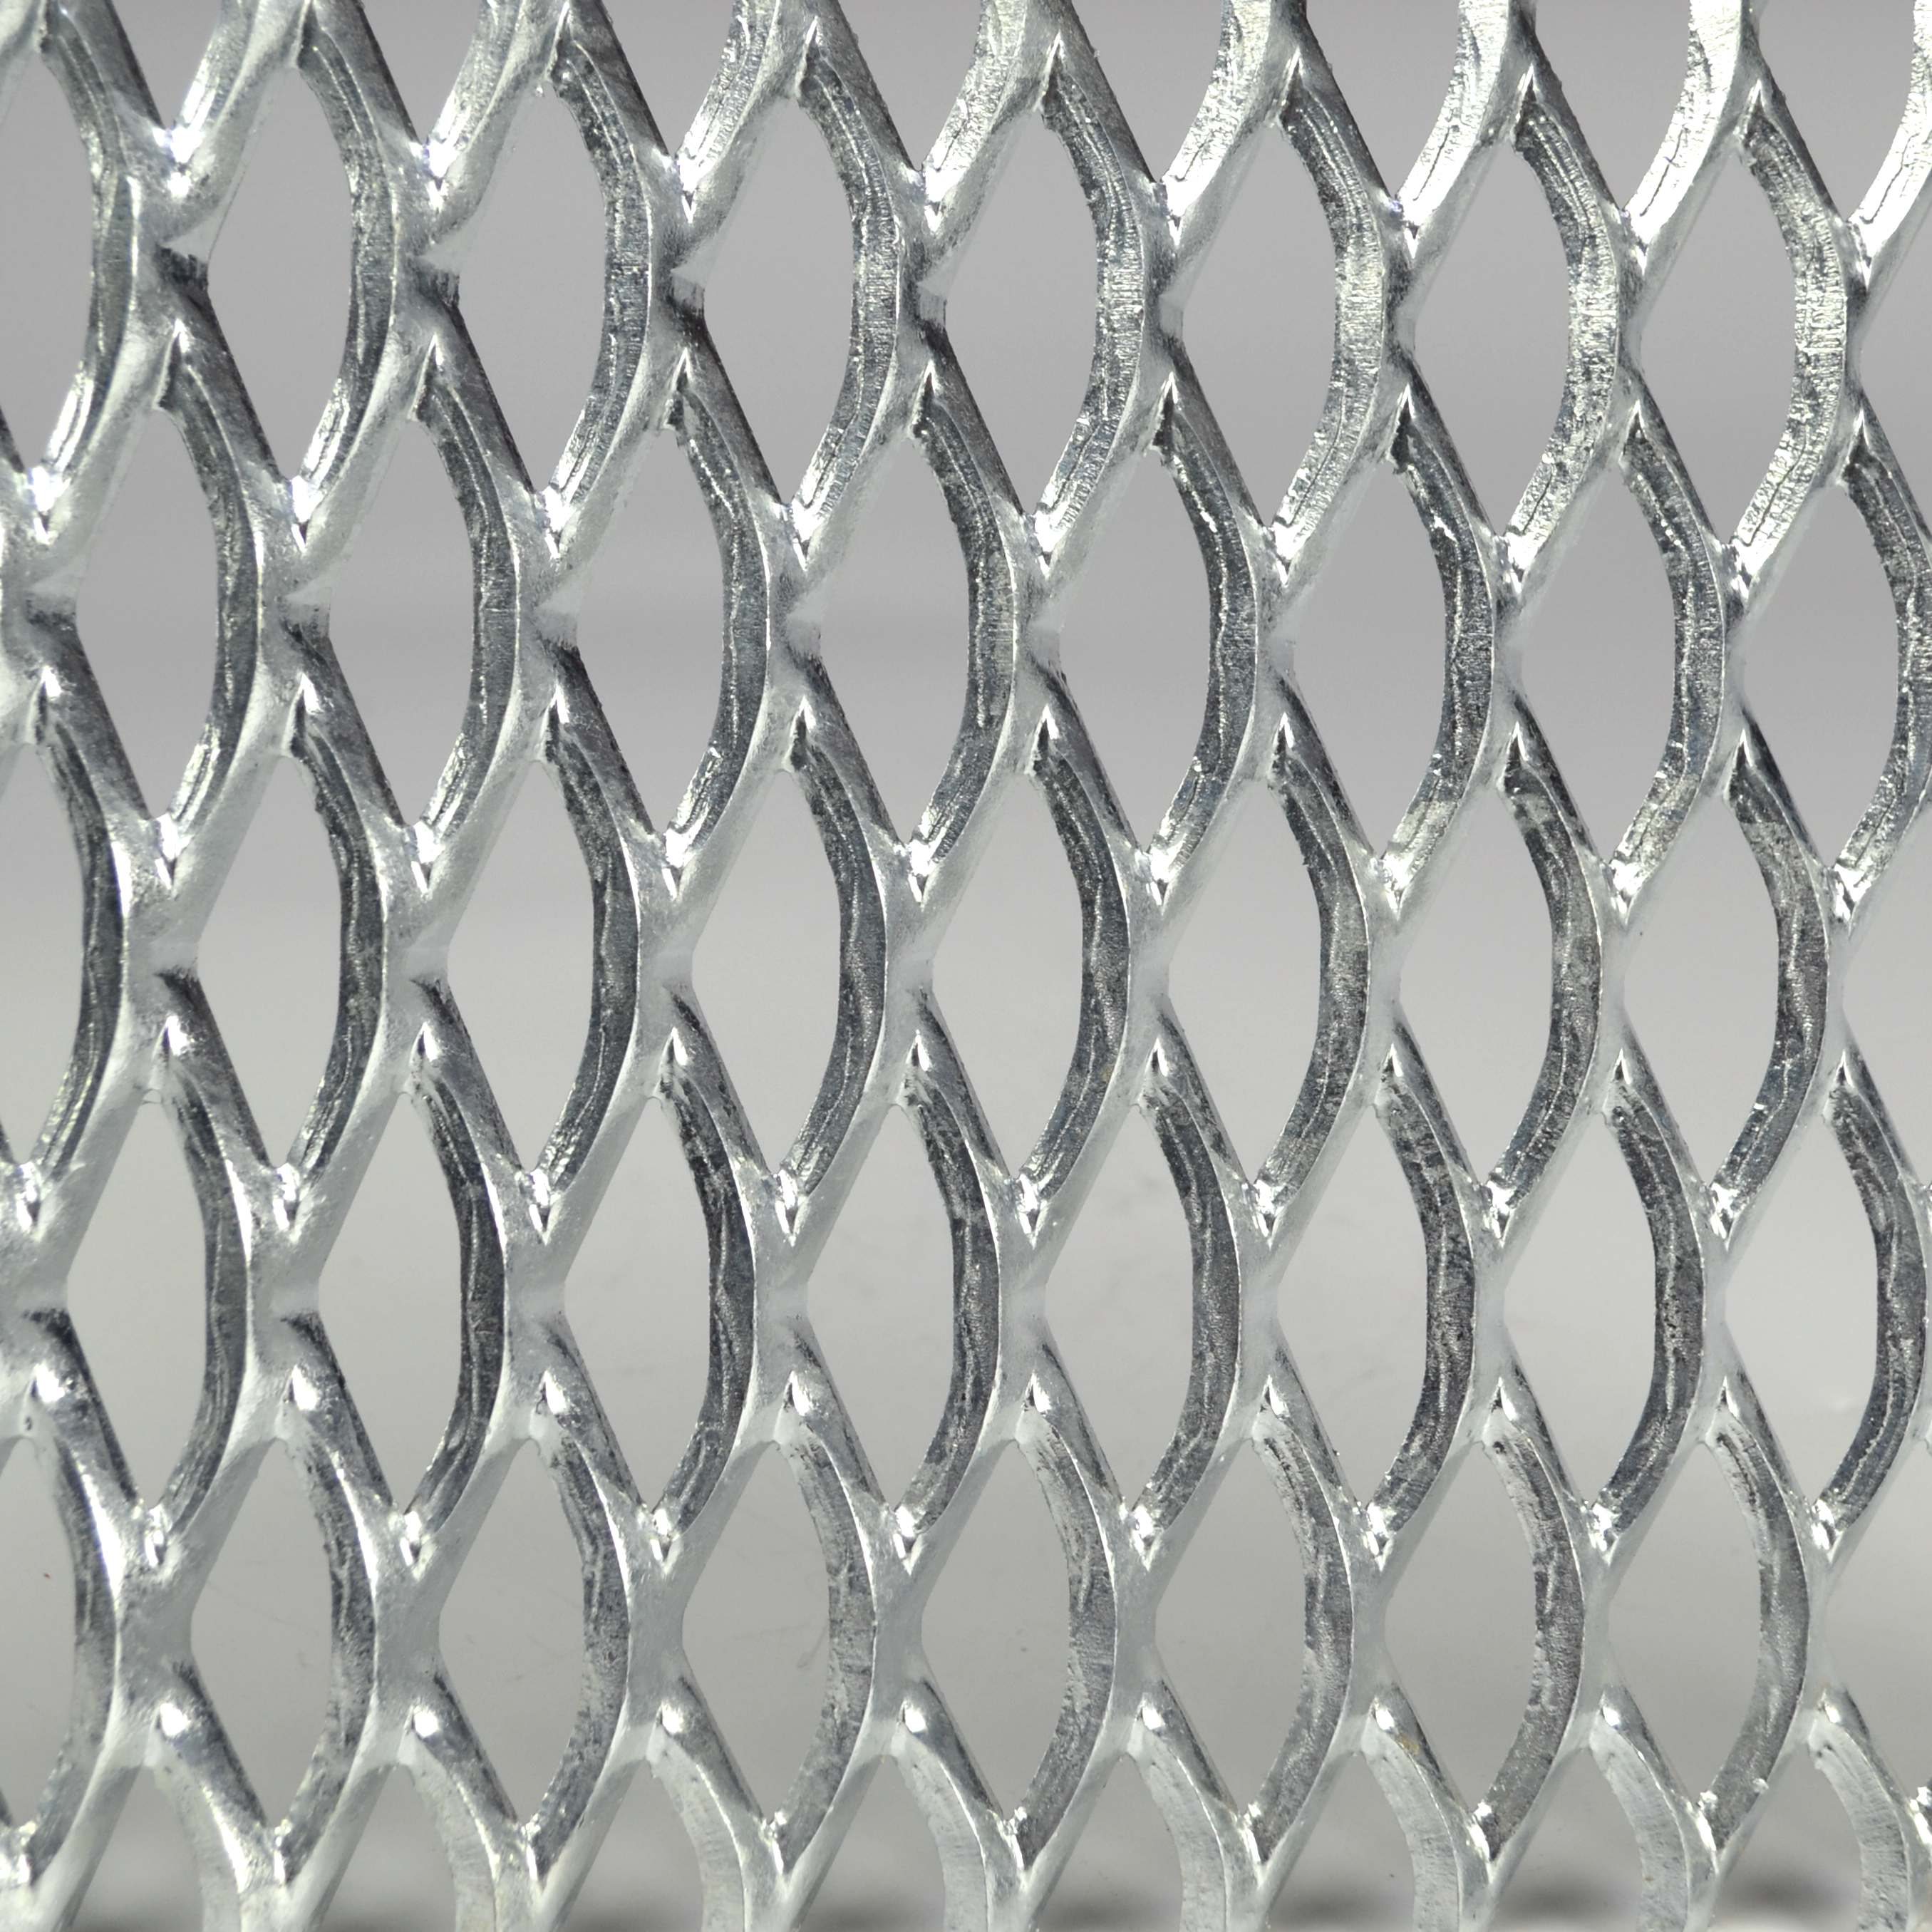 Introduction of expanded metal mesh